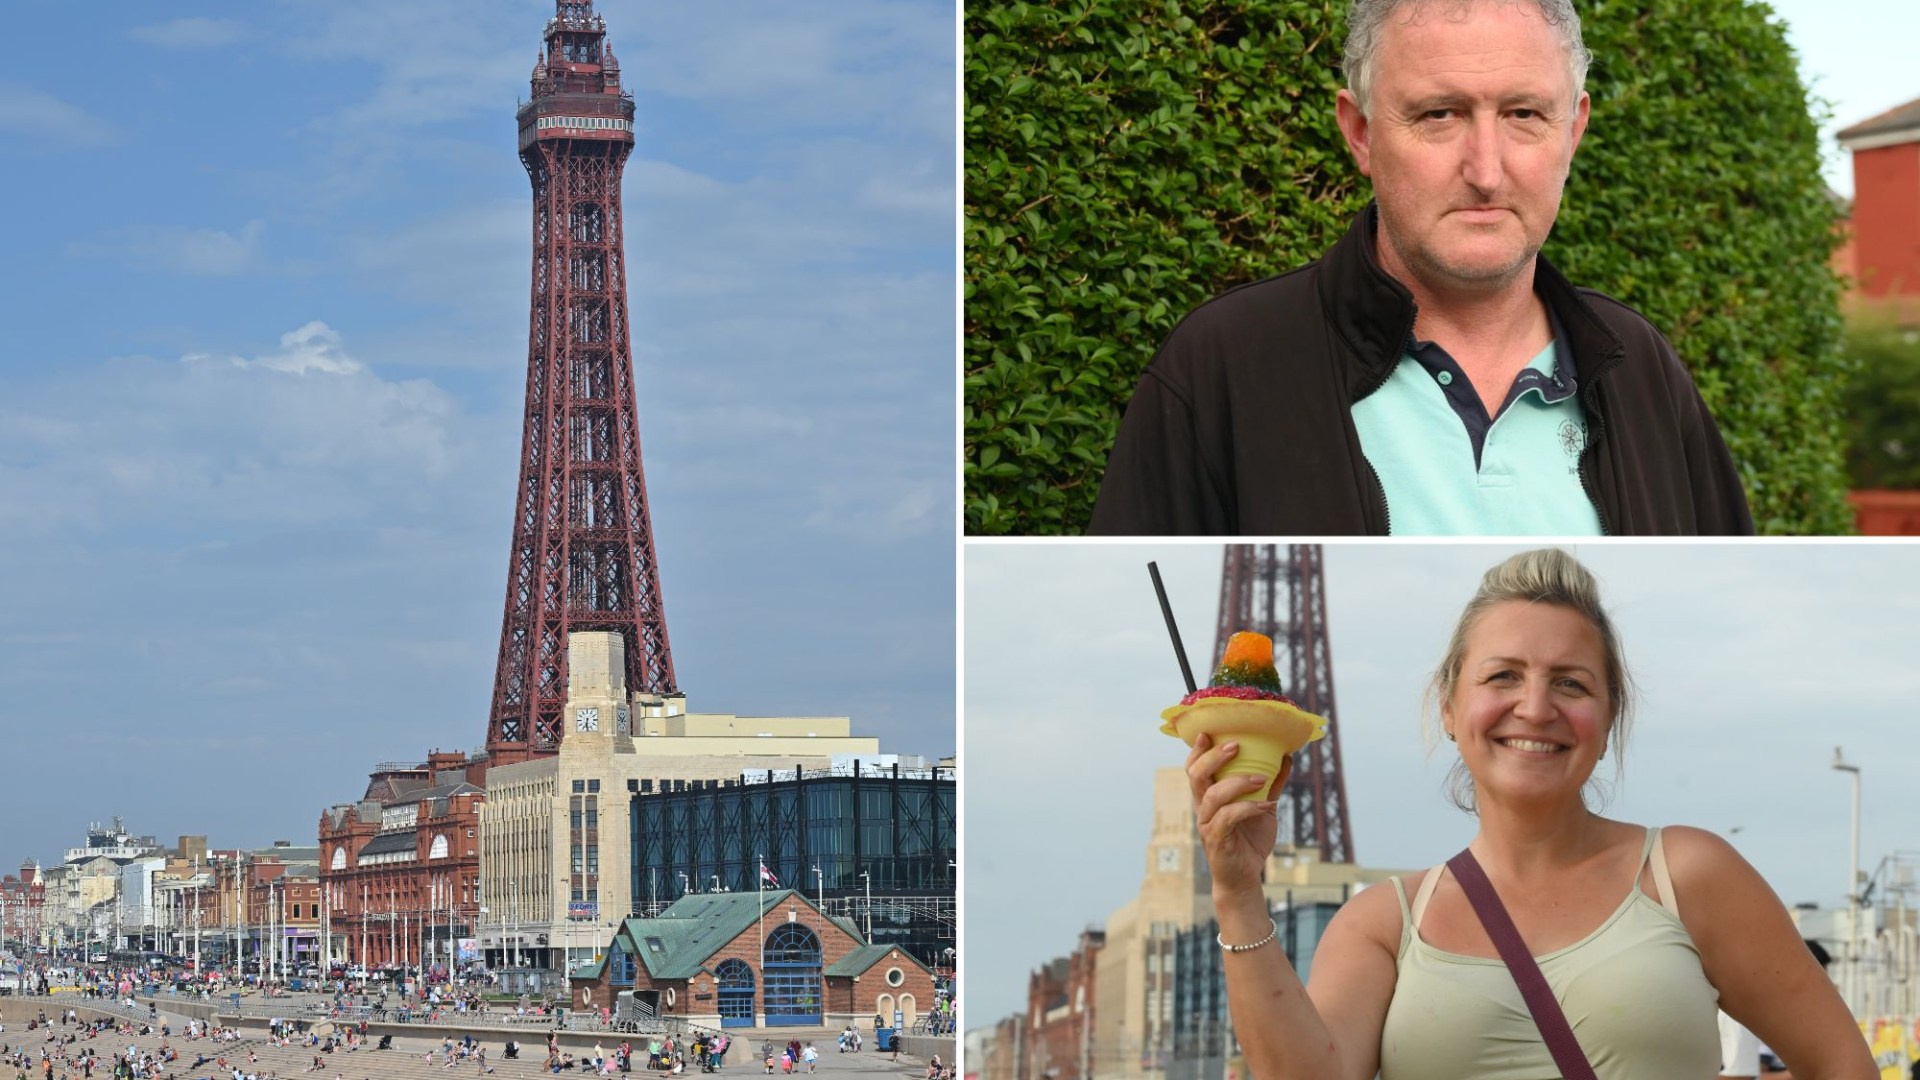 We live by ‘world famous’ Blackpool Tower – council is ‘wasting’ £11m on PAINT when they should focus on dark underbelly